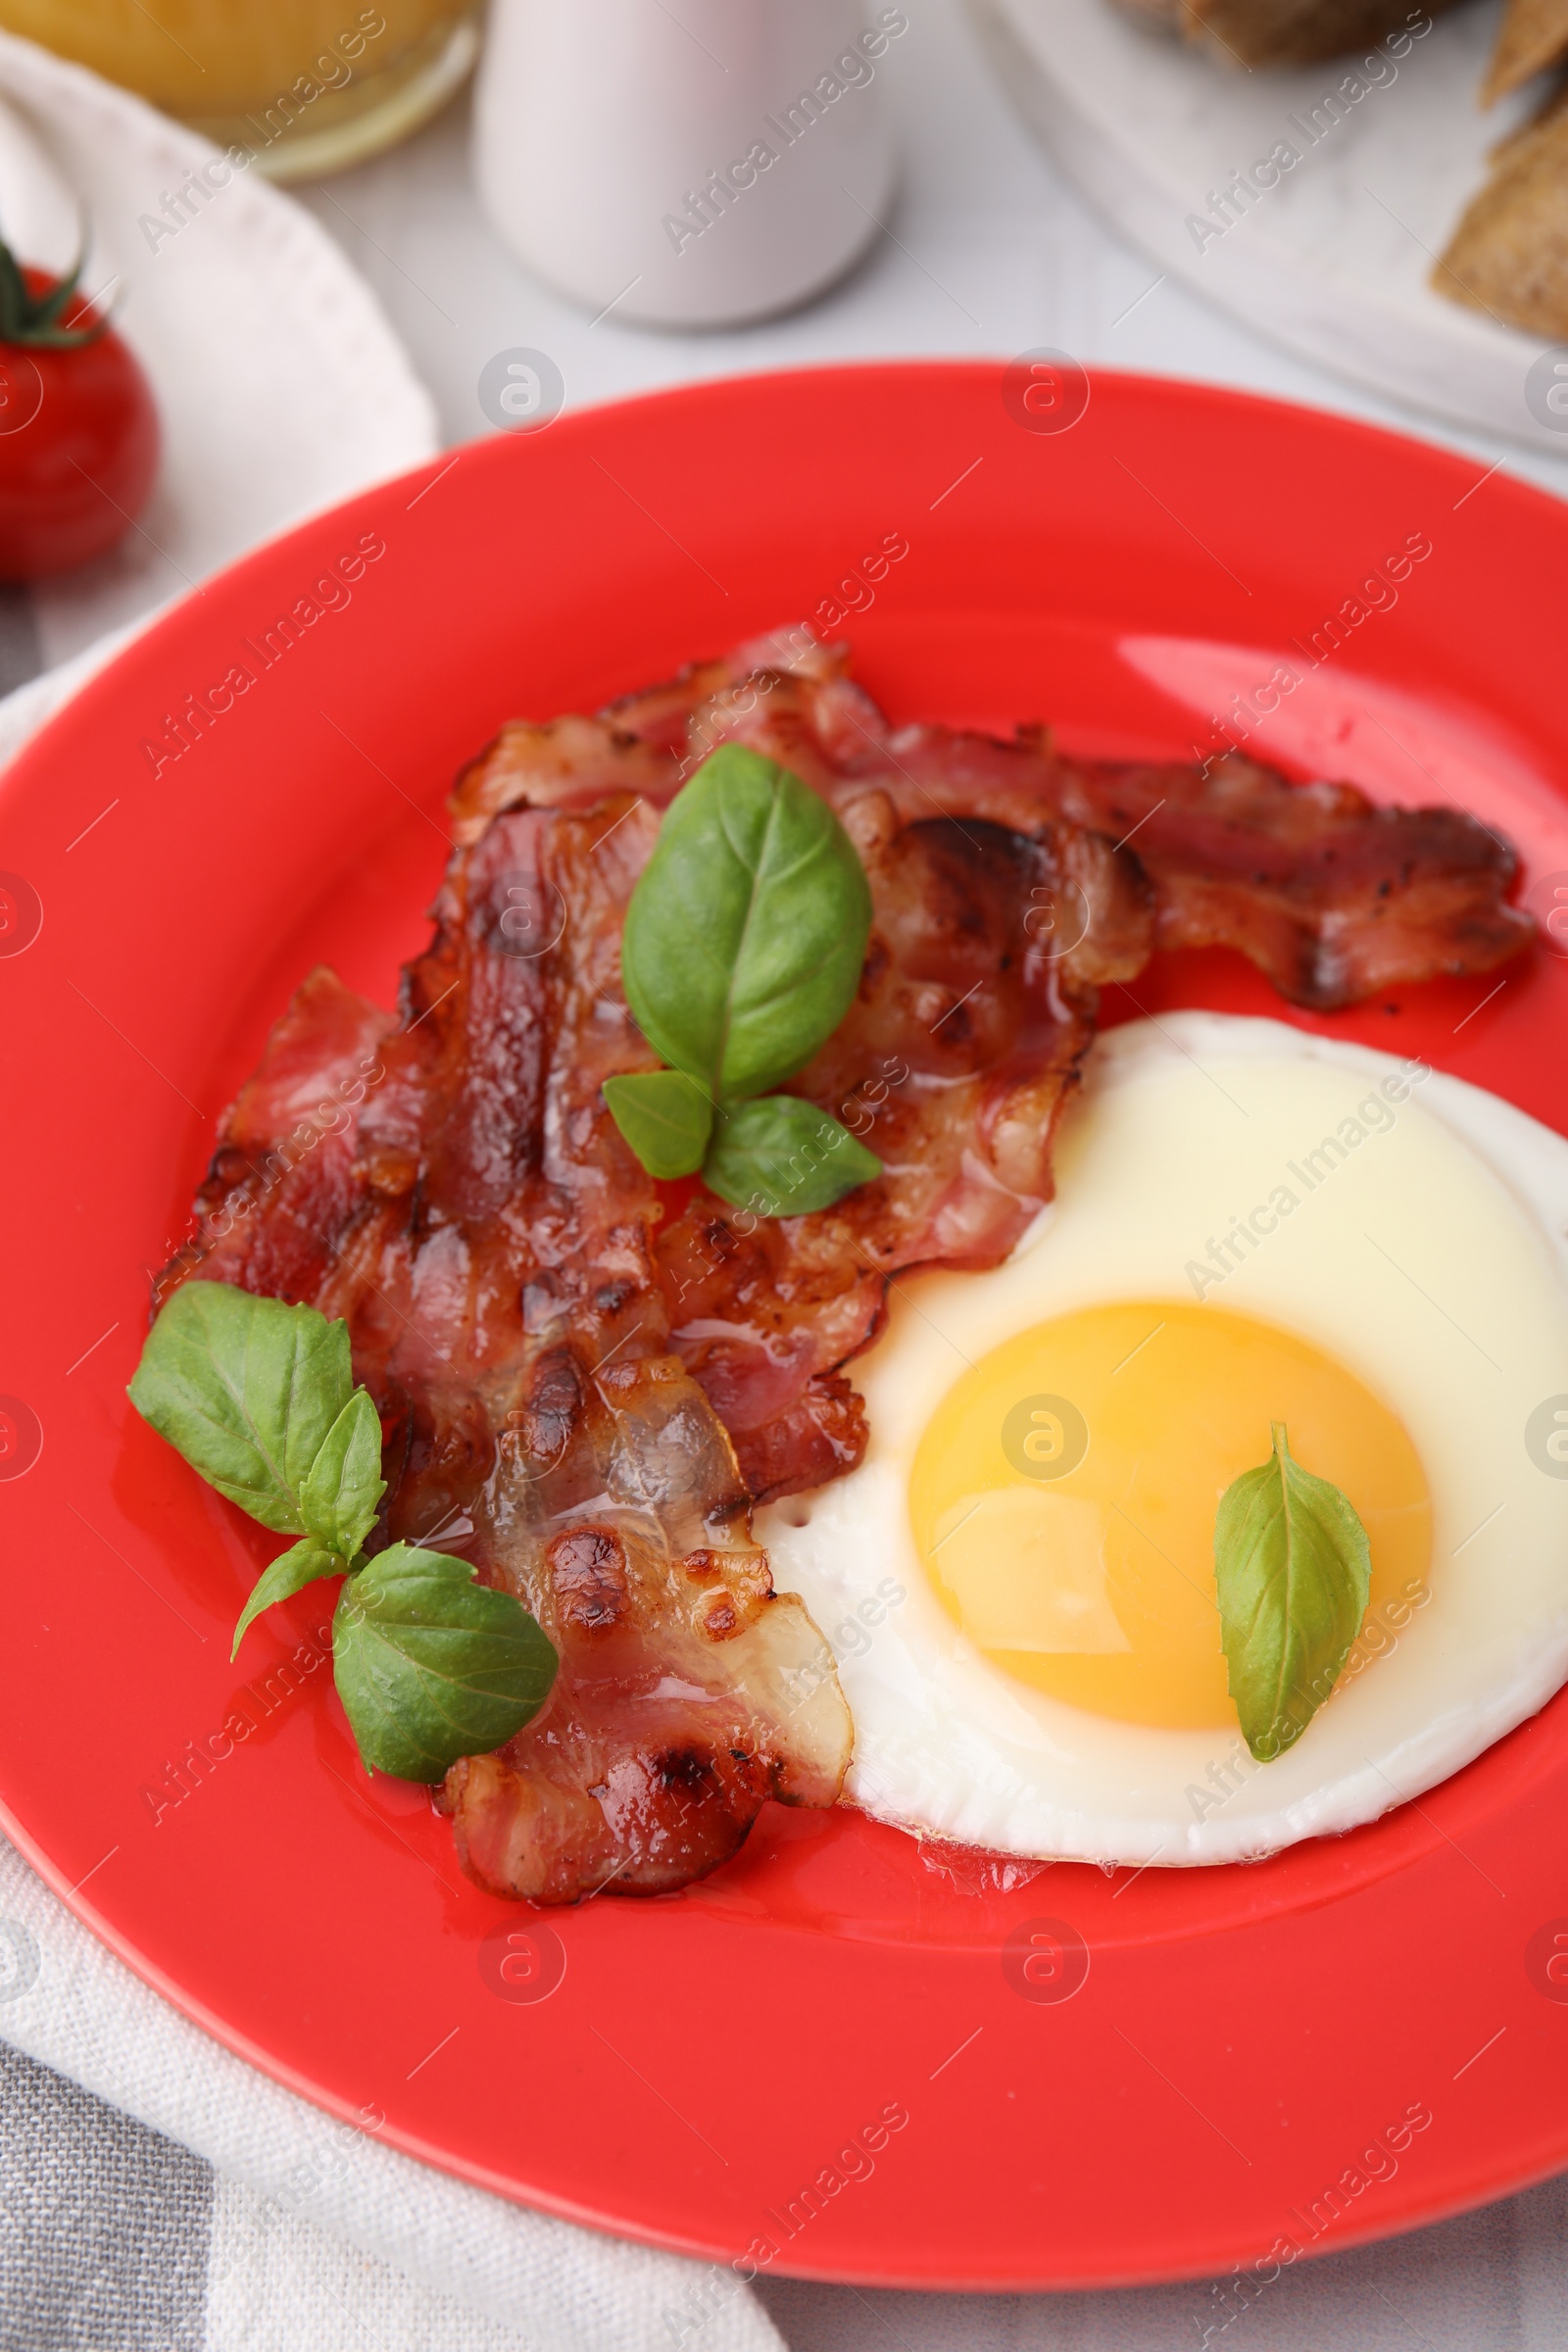 Photo of Fried egg, bacon and basil on table